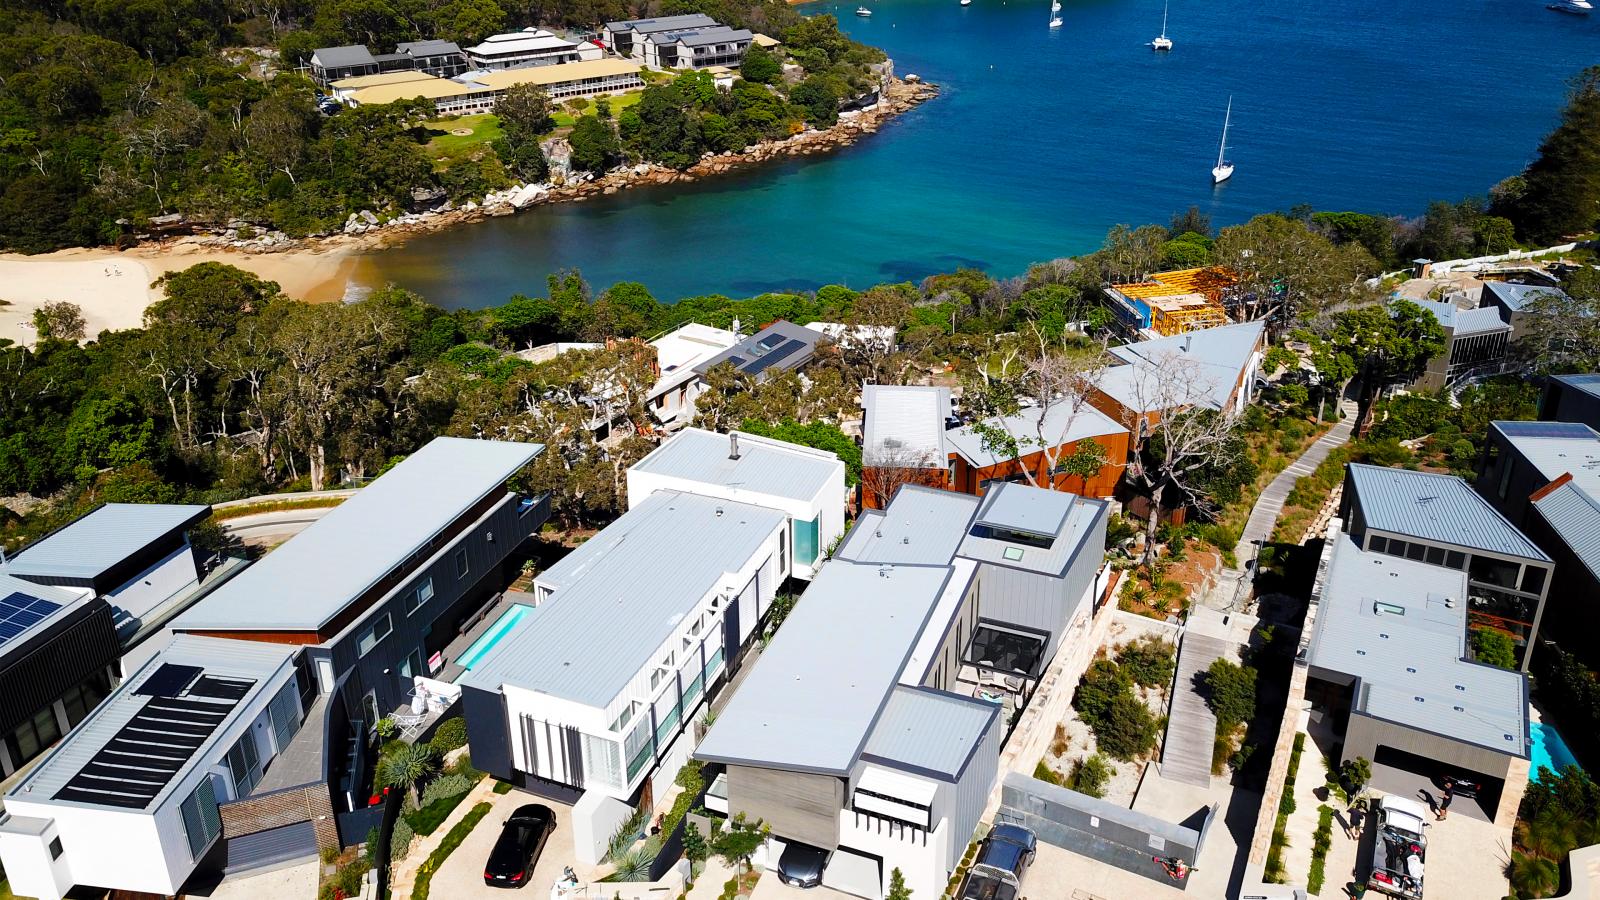 Aerial view of a coastal neighborhood in Spring Cove, featuring modern homes with flat roofs and large windows. The area, near Manly, is surrounded by lush greenery and overlooks a serene, blue waterfront with several boats anchored. There's a sandy beach area adjacent to the water.